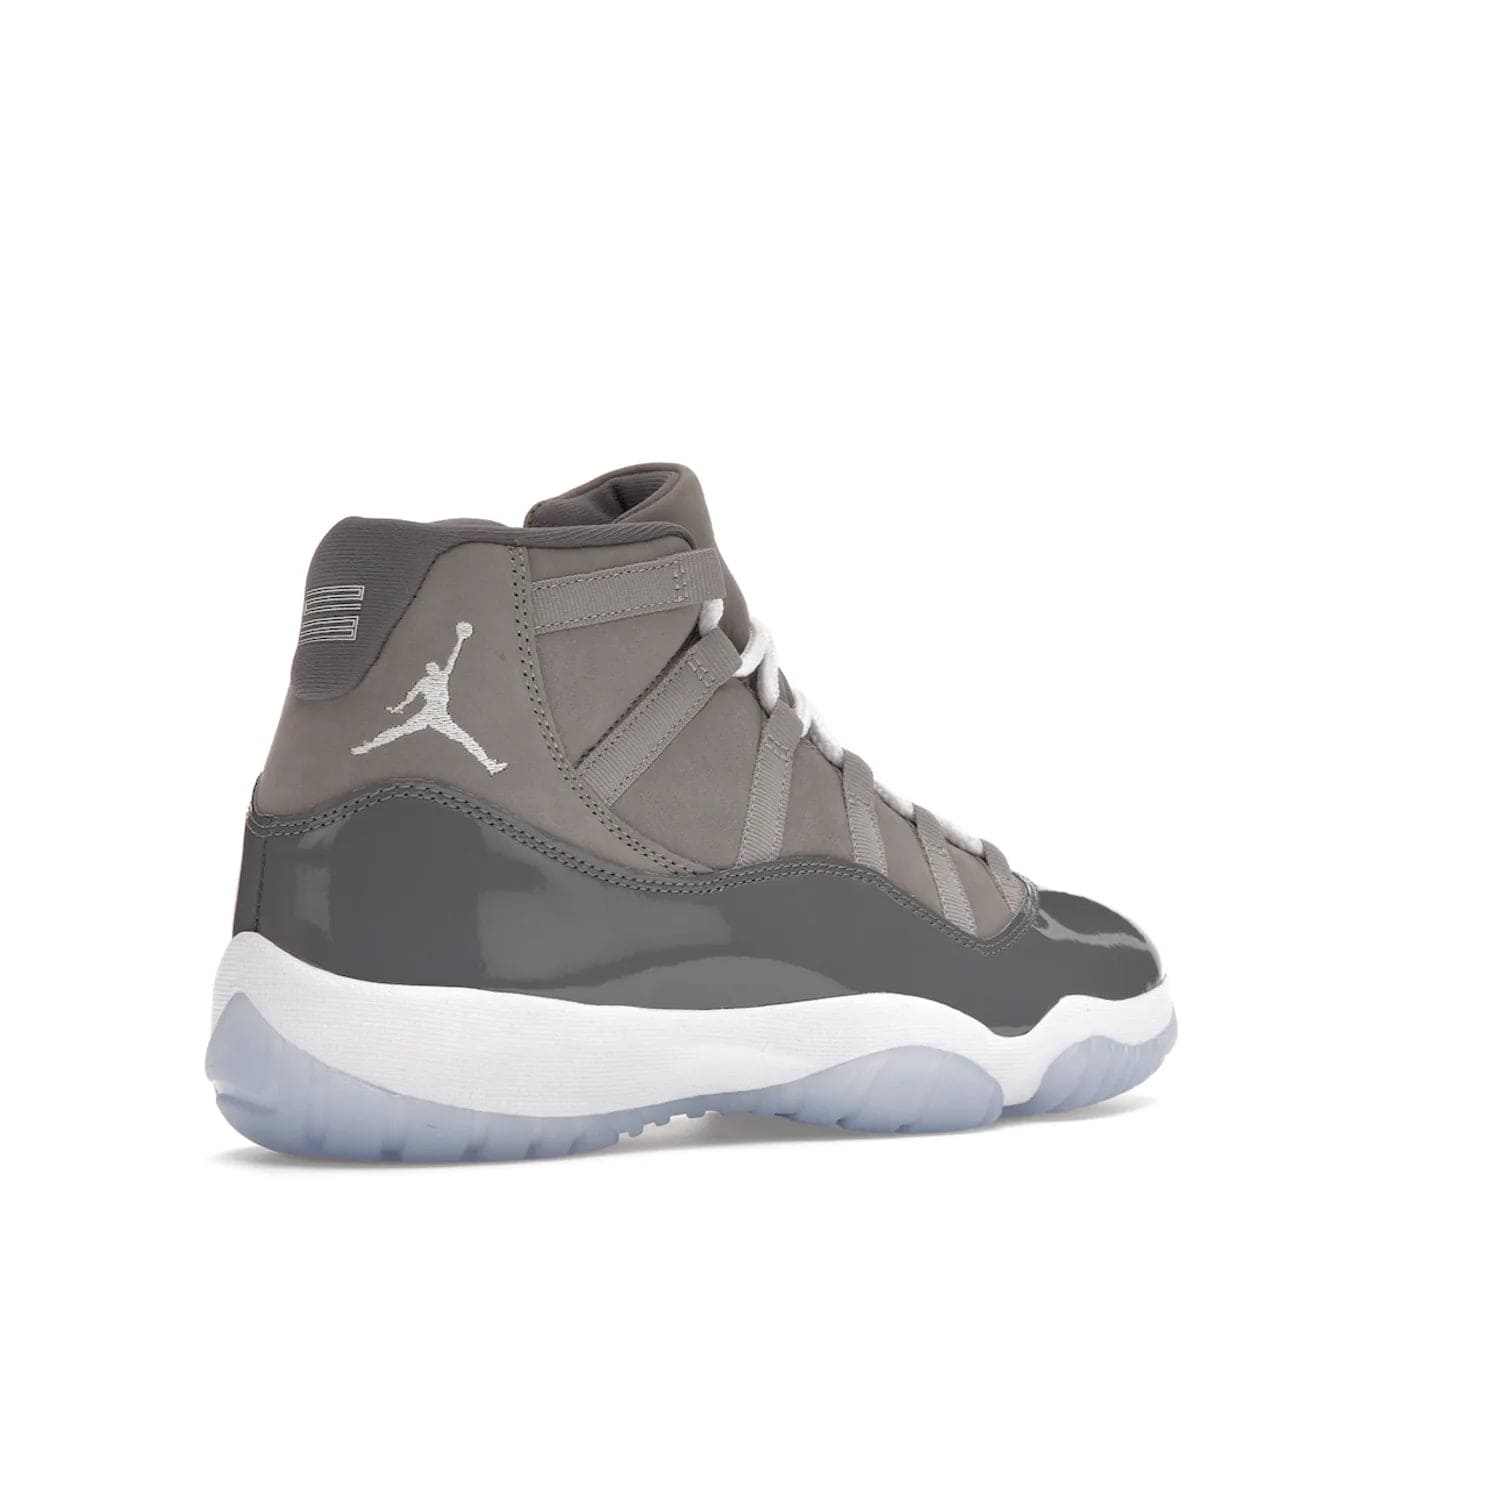 Jordan 11 Retro Cool Grey (2021) - Image 33 - Only at www.BallersClubKickz.com - Shop the Air Jordan 11 Retro Cool Grey (2021) for a must-have sneaker with a Cool Grey Durabuck upper, patent leather overlays, signature Jumpman embroidery, a white midsole, icy blue translucent outsole, and Multi-Color accents.  Released in December 2021 for $225.